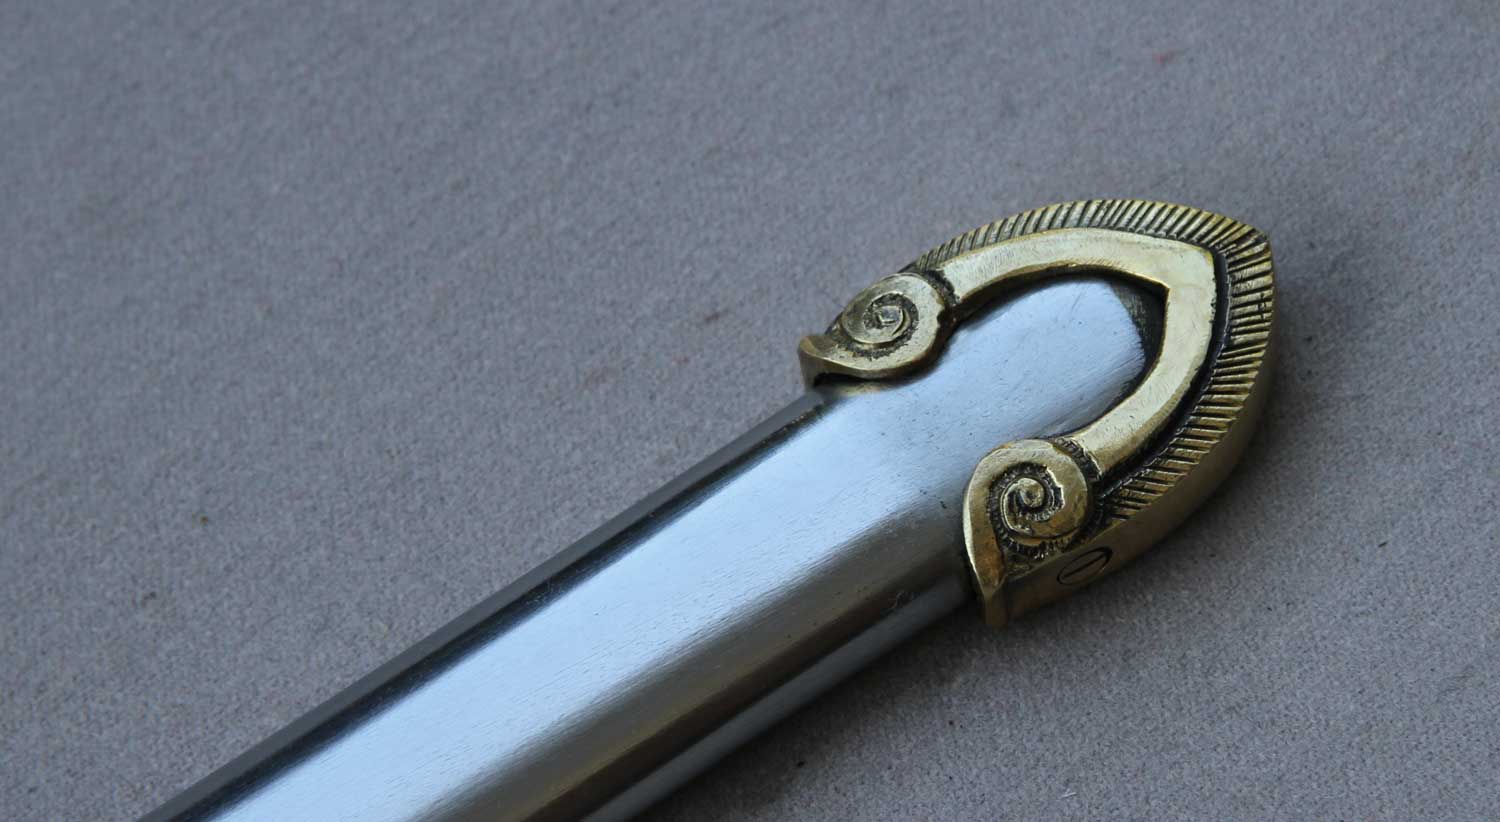 British, Life Guards Officer's Sword, 1865 Pattern